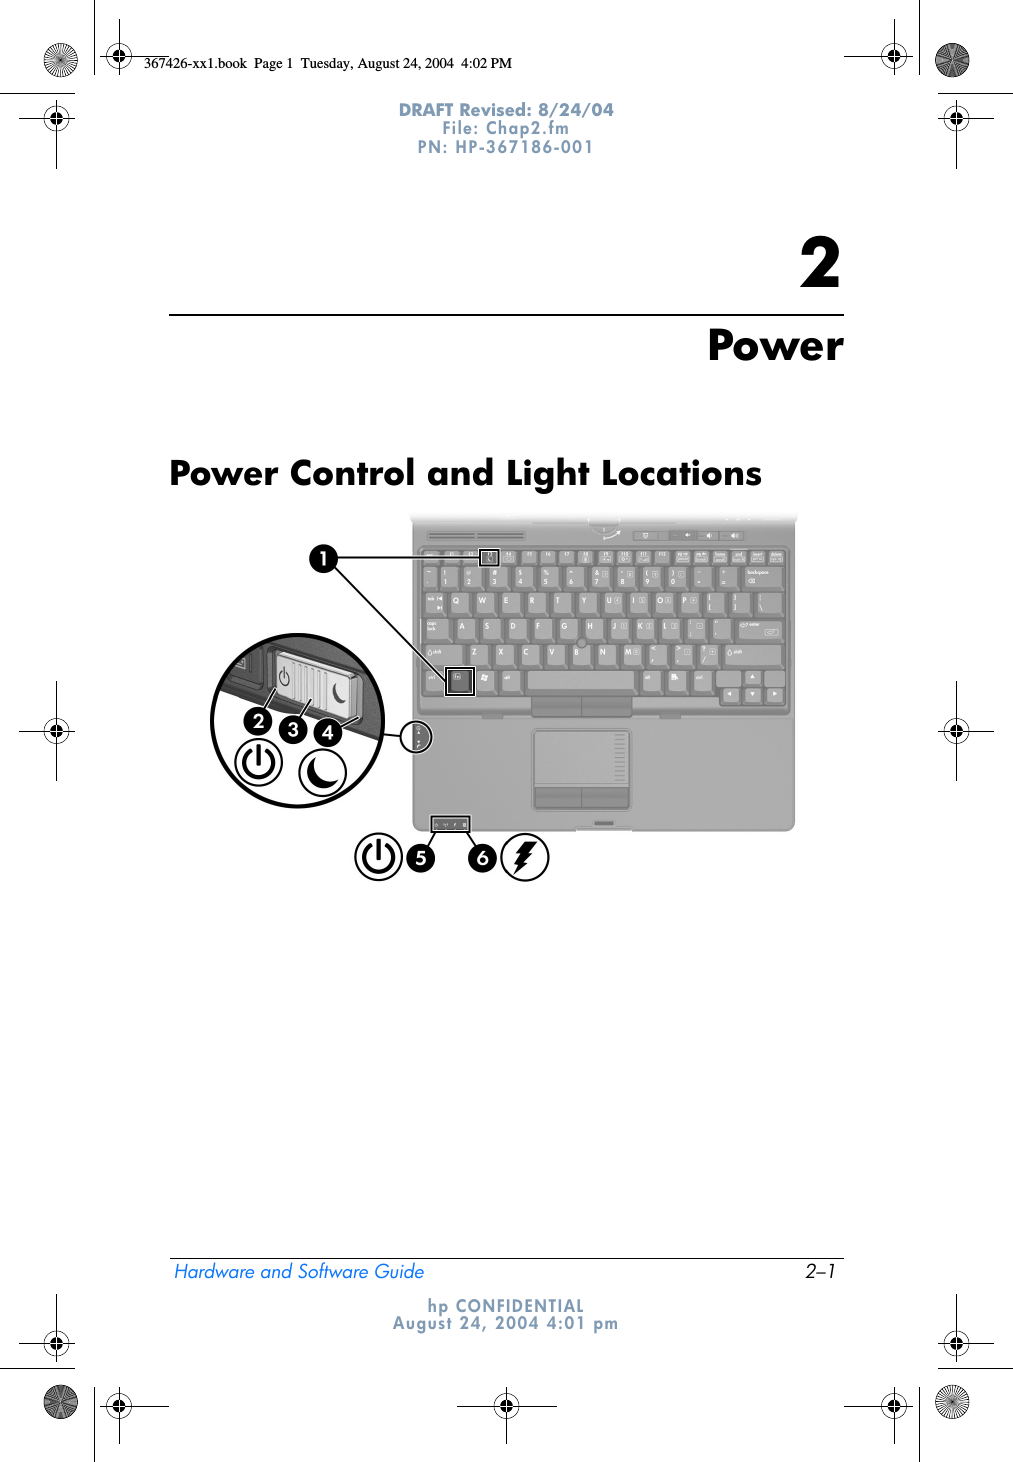 Hardware and Software Guide 2–1DRAFT Revised: 8/24/04File: Chap2.fm PN: HP-367186-001 hp CONFIDENTIALAugust 24, 2004 4:01 pm2PowerPower Control and Light Locations367426-xx1.book  Page 1  Tuesday, August 24, 2004  4:02 PM